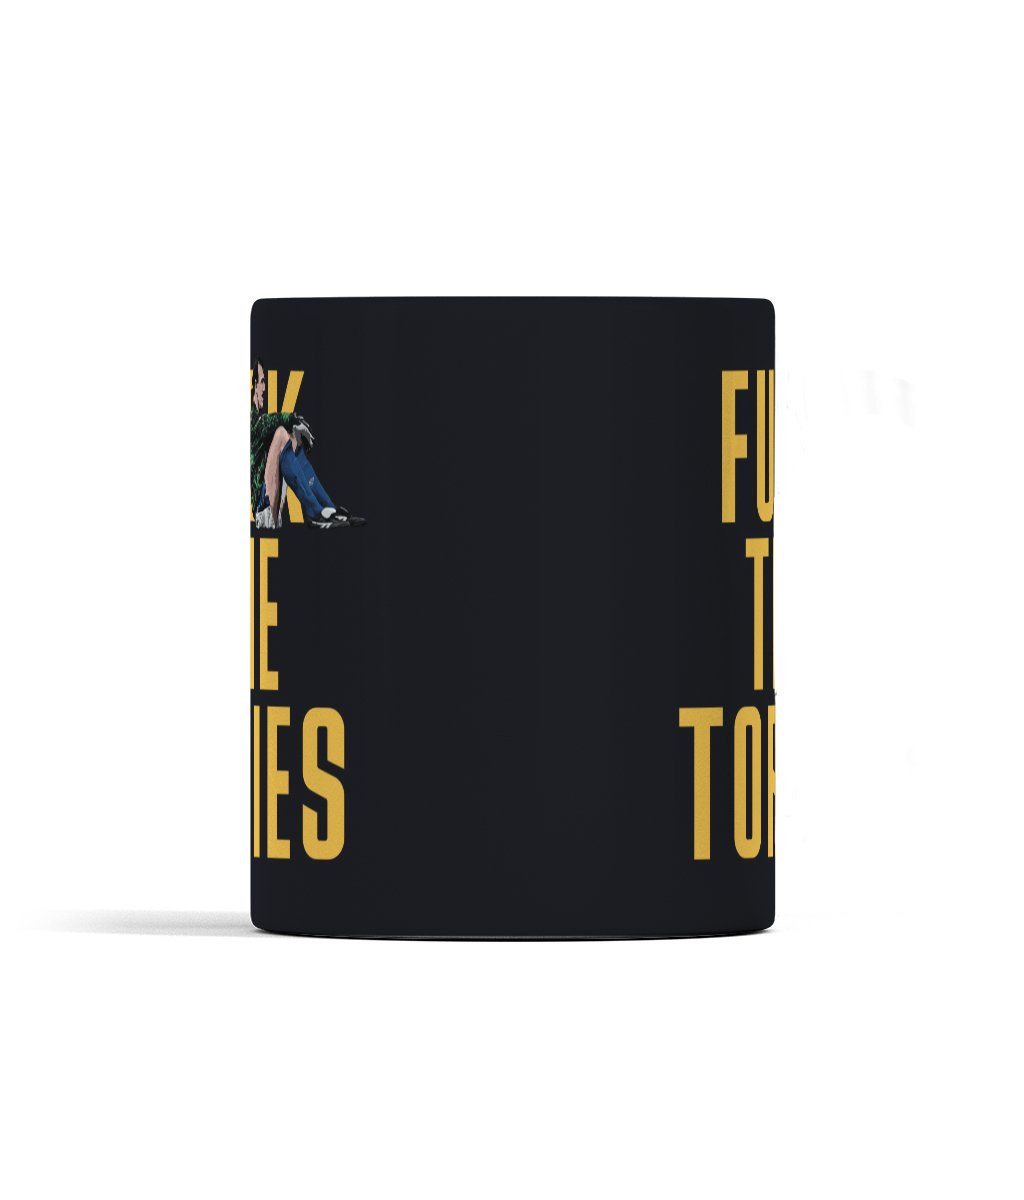 Neville Southall - F The Tories - Mug - Forever Everton